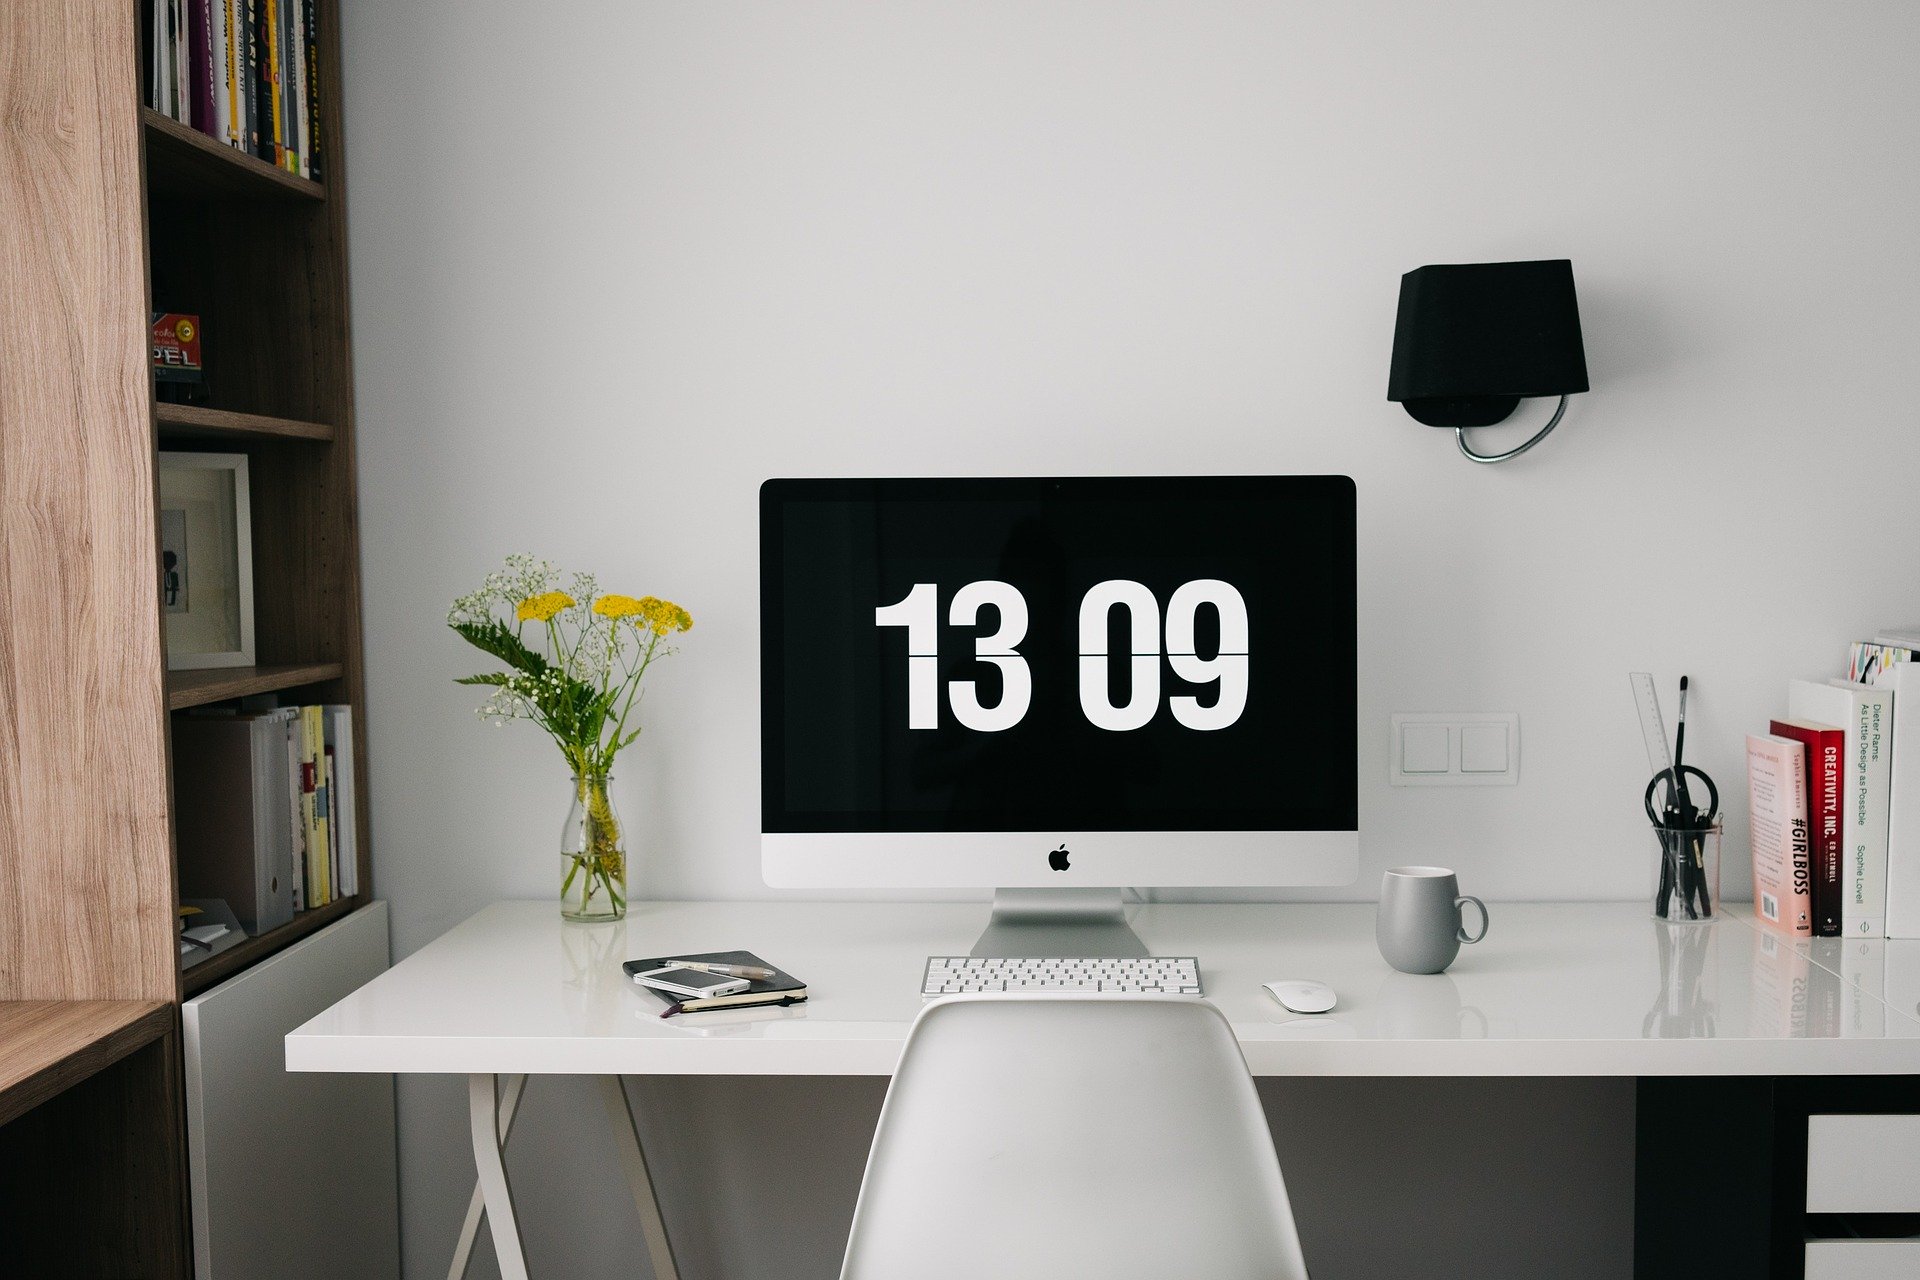 Tips for learning and working from home: Create a separate workspace